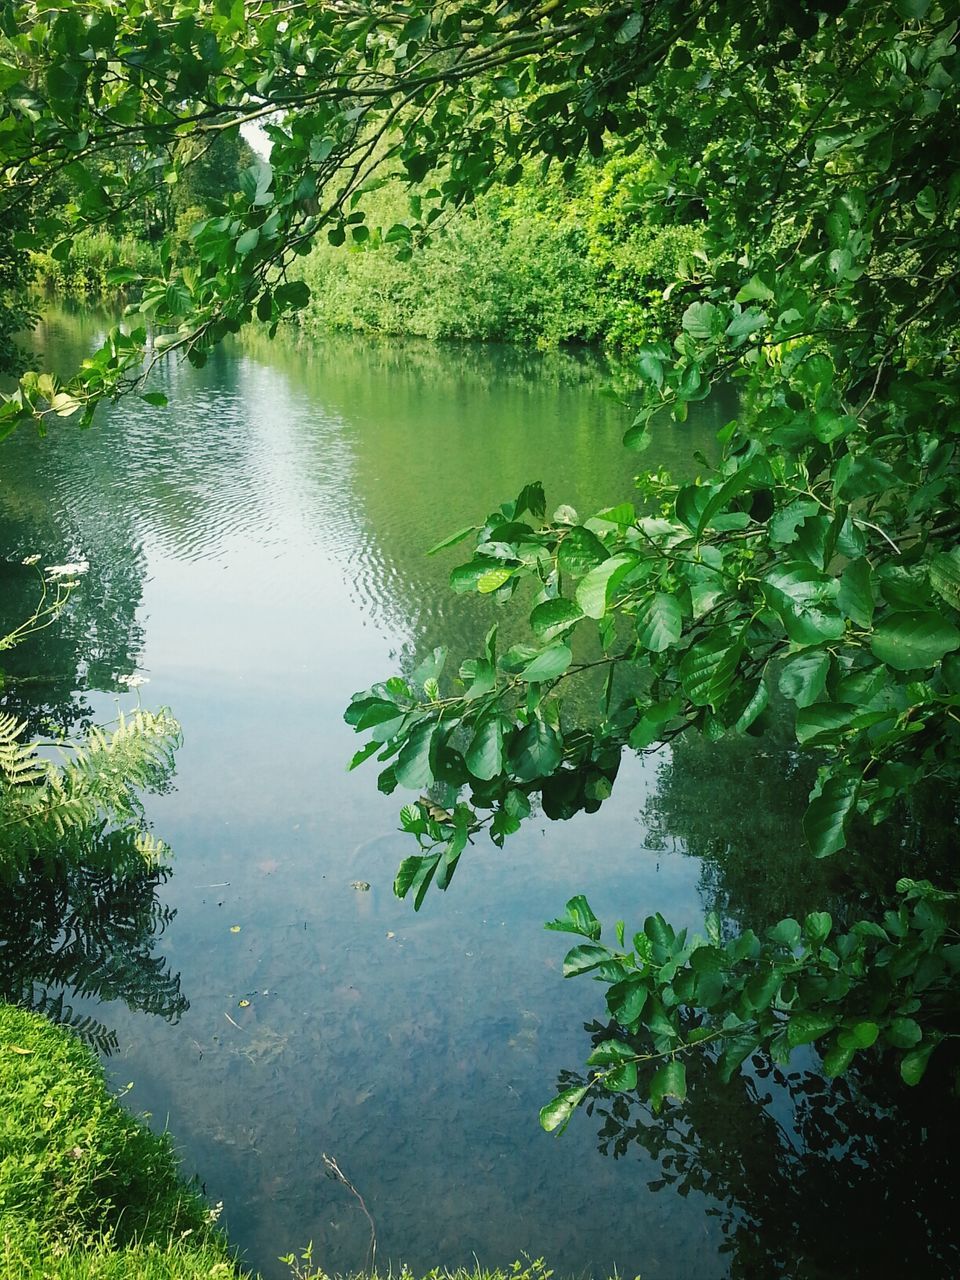 water, tree, reflection, lake, tranquility, tranquil scene, green color, growth, beauty in nature, nature, scenics, branch, leaf, waterfront, pond, plant, idyllic, day, outdoors, no people